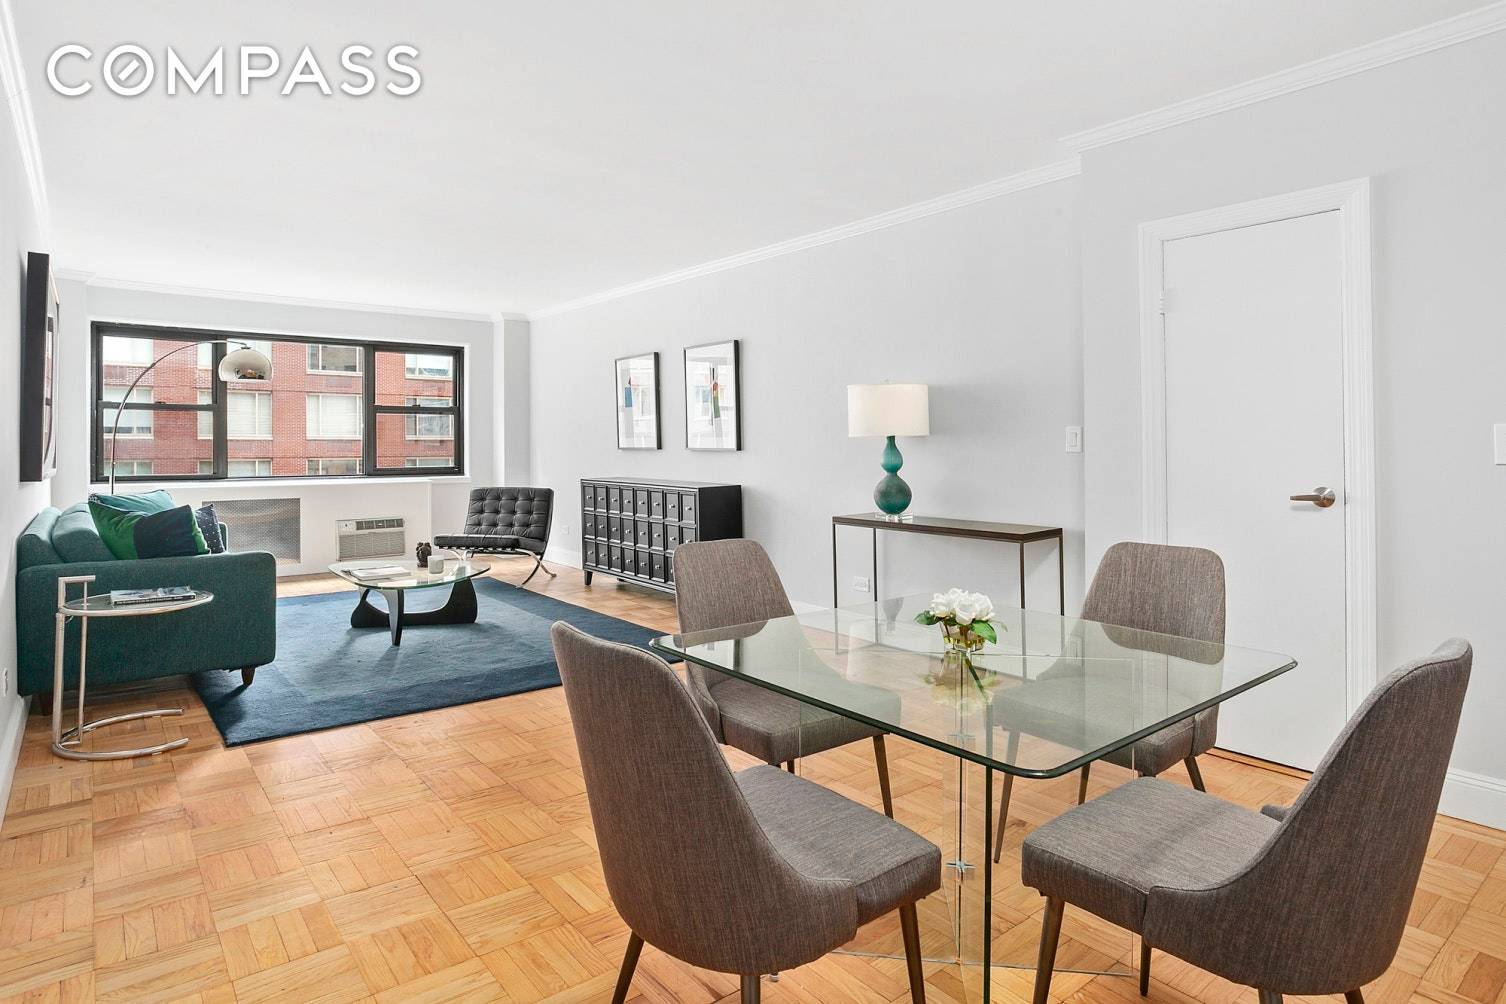 Freshly renovated, sunny and spacious one bedroom with low monthlies overlooking tree lined and double wide East 72nd Street at Charing Cross House, an impeccable full service doorman building located ...